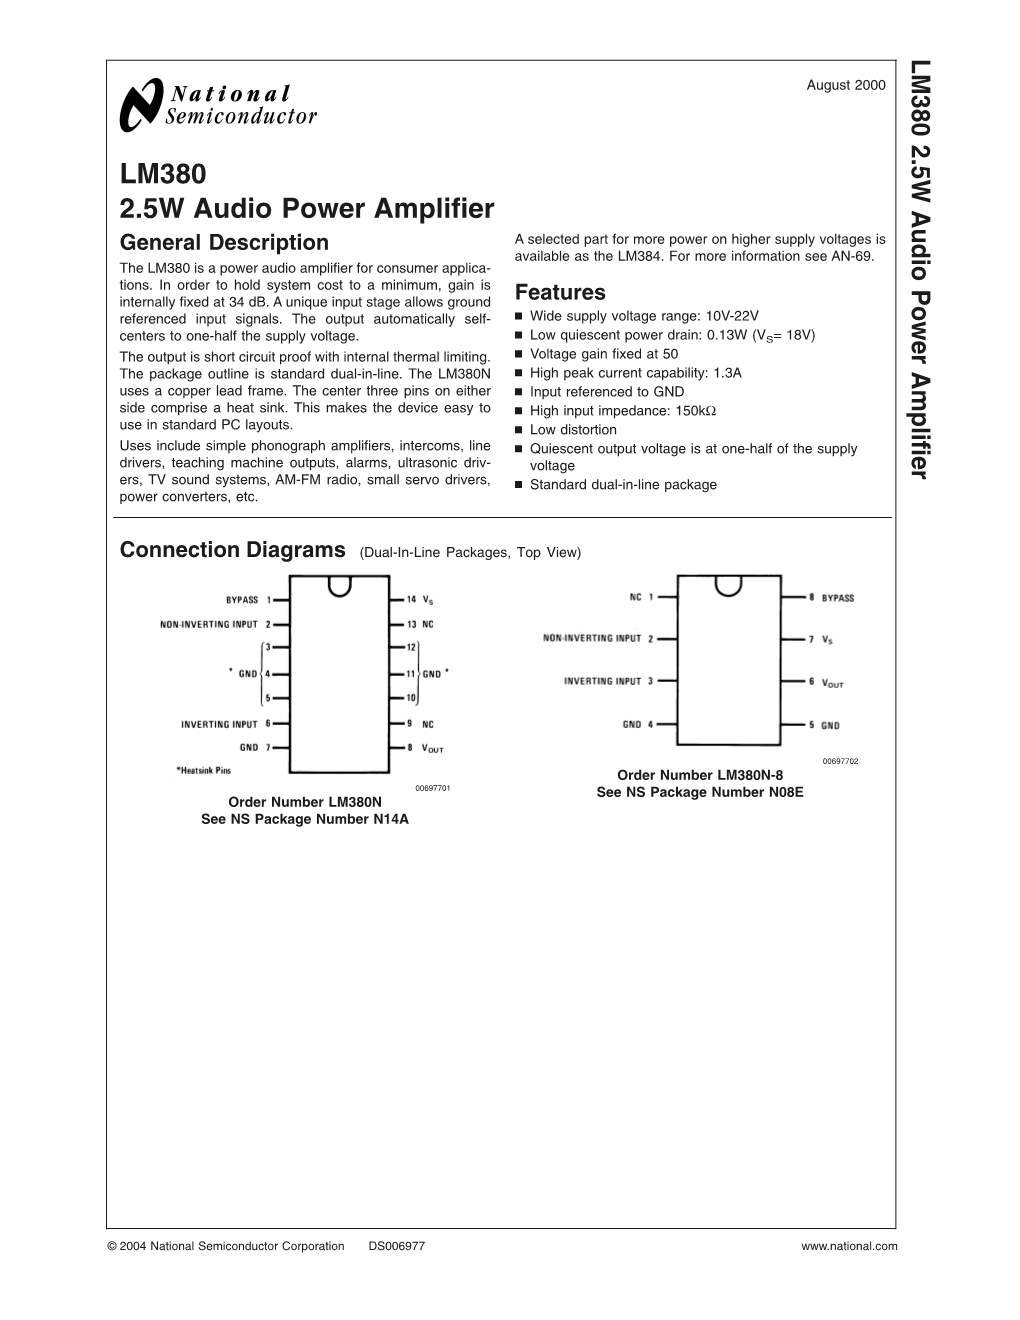 LM380 2.5W Audio Power Amplifier General Description a Selected Part for More Power on Higher Supply Voltages Is Available As the LM384